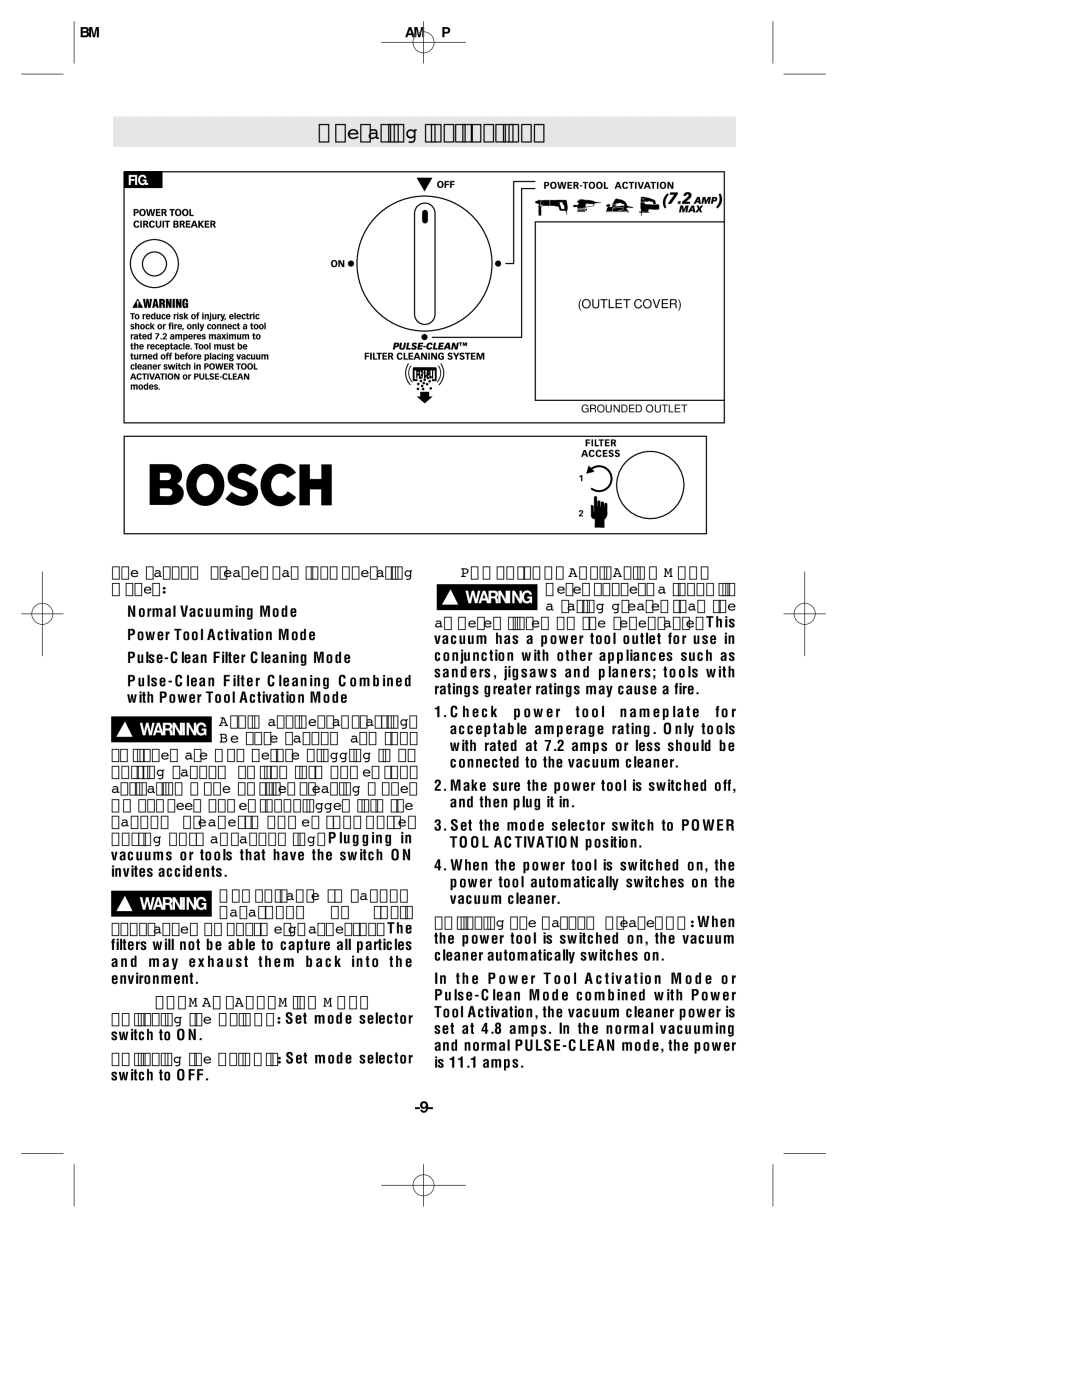 Bosch Appliances 3931 manual Operating Instructions, Normal Vacuuming Mode, POWER-TOOL Activation Mode 